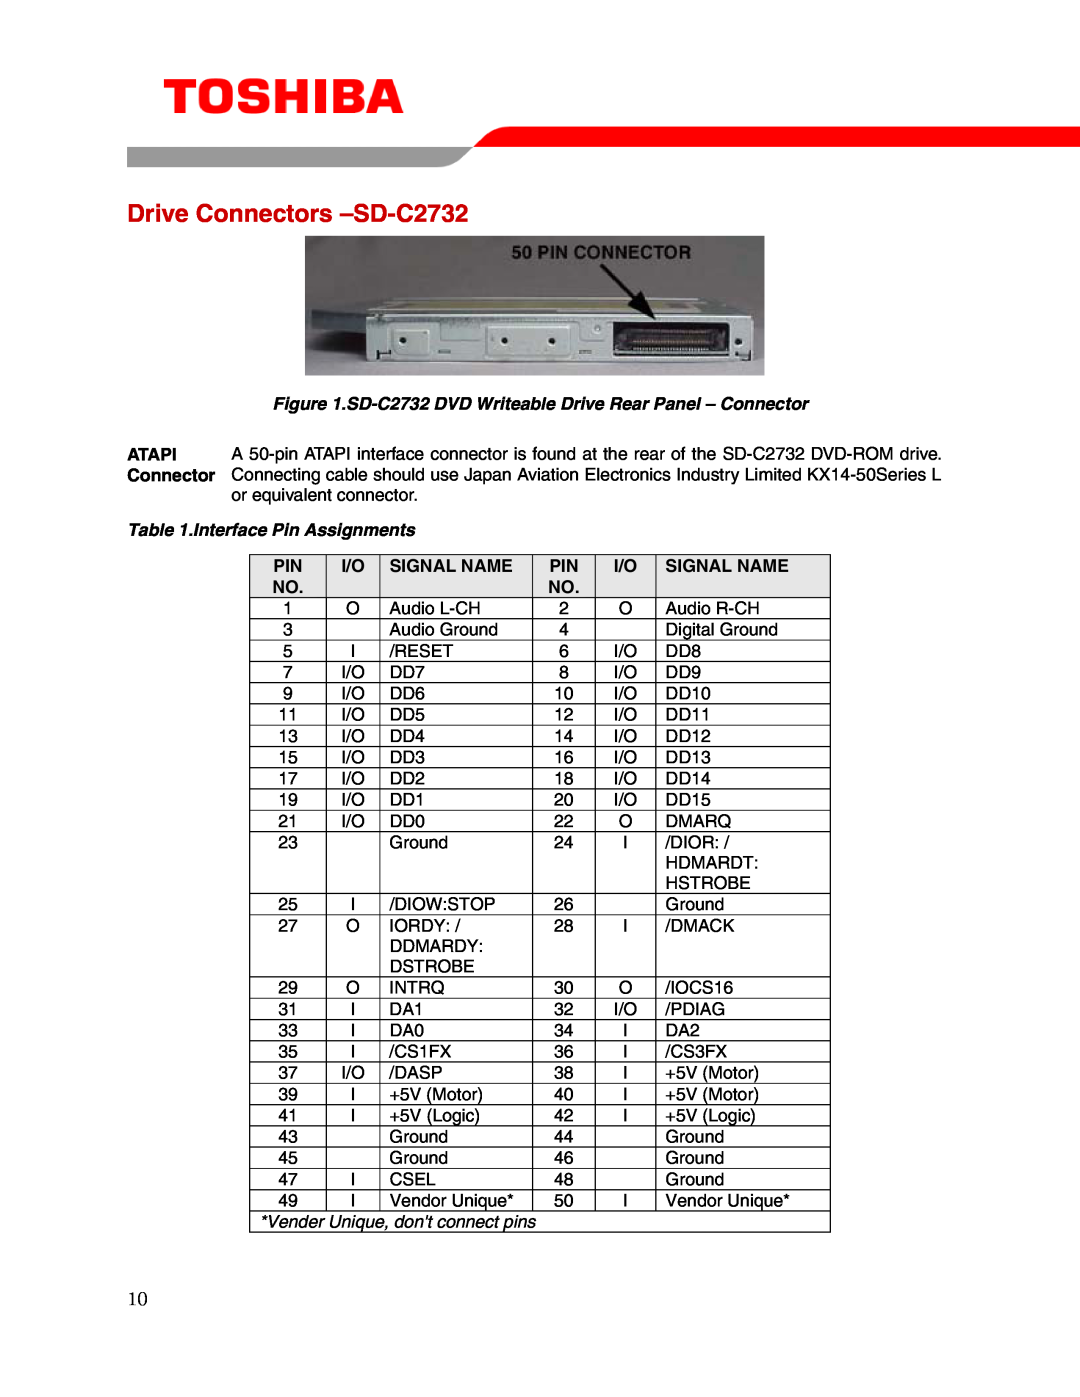 Toshiba Drive Connectors -SD-C2732, SD-C2732 DVD Writeable Drive Rear Panel - Connector, Interface Pin Assignments 